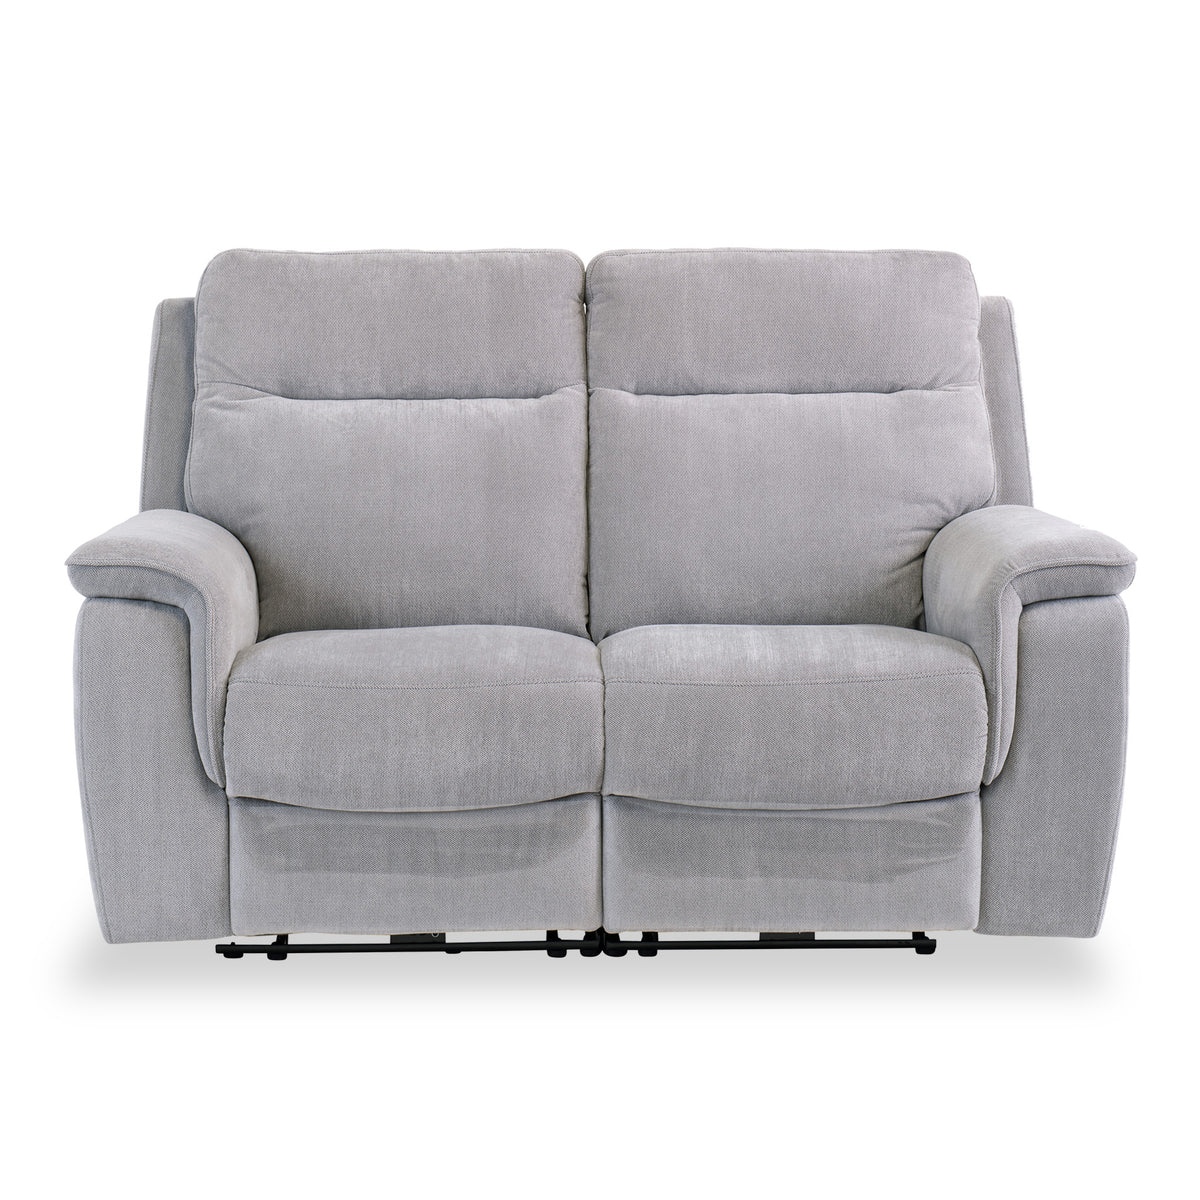 Weston Silver Grey Fabric Electric Reclining 2 Seater Sofa from Roseland furniture